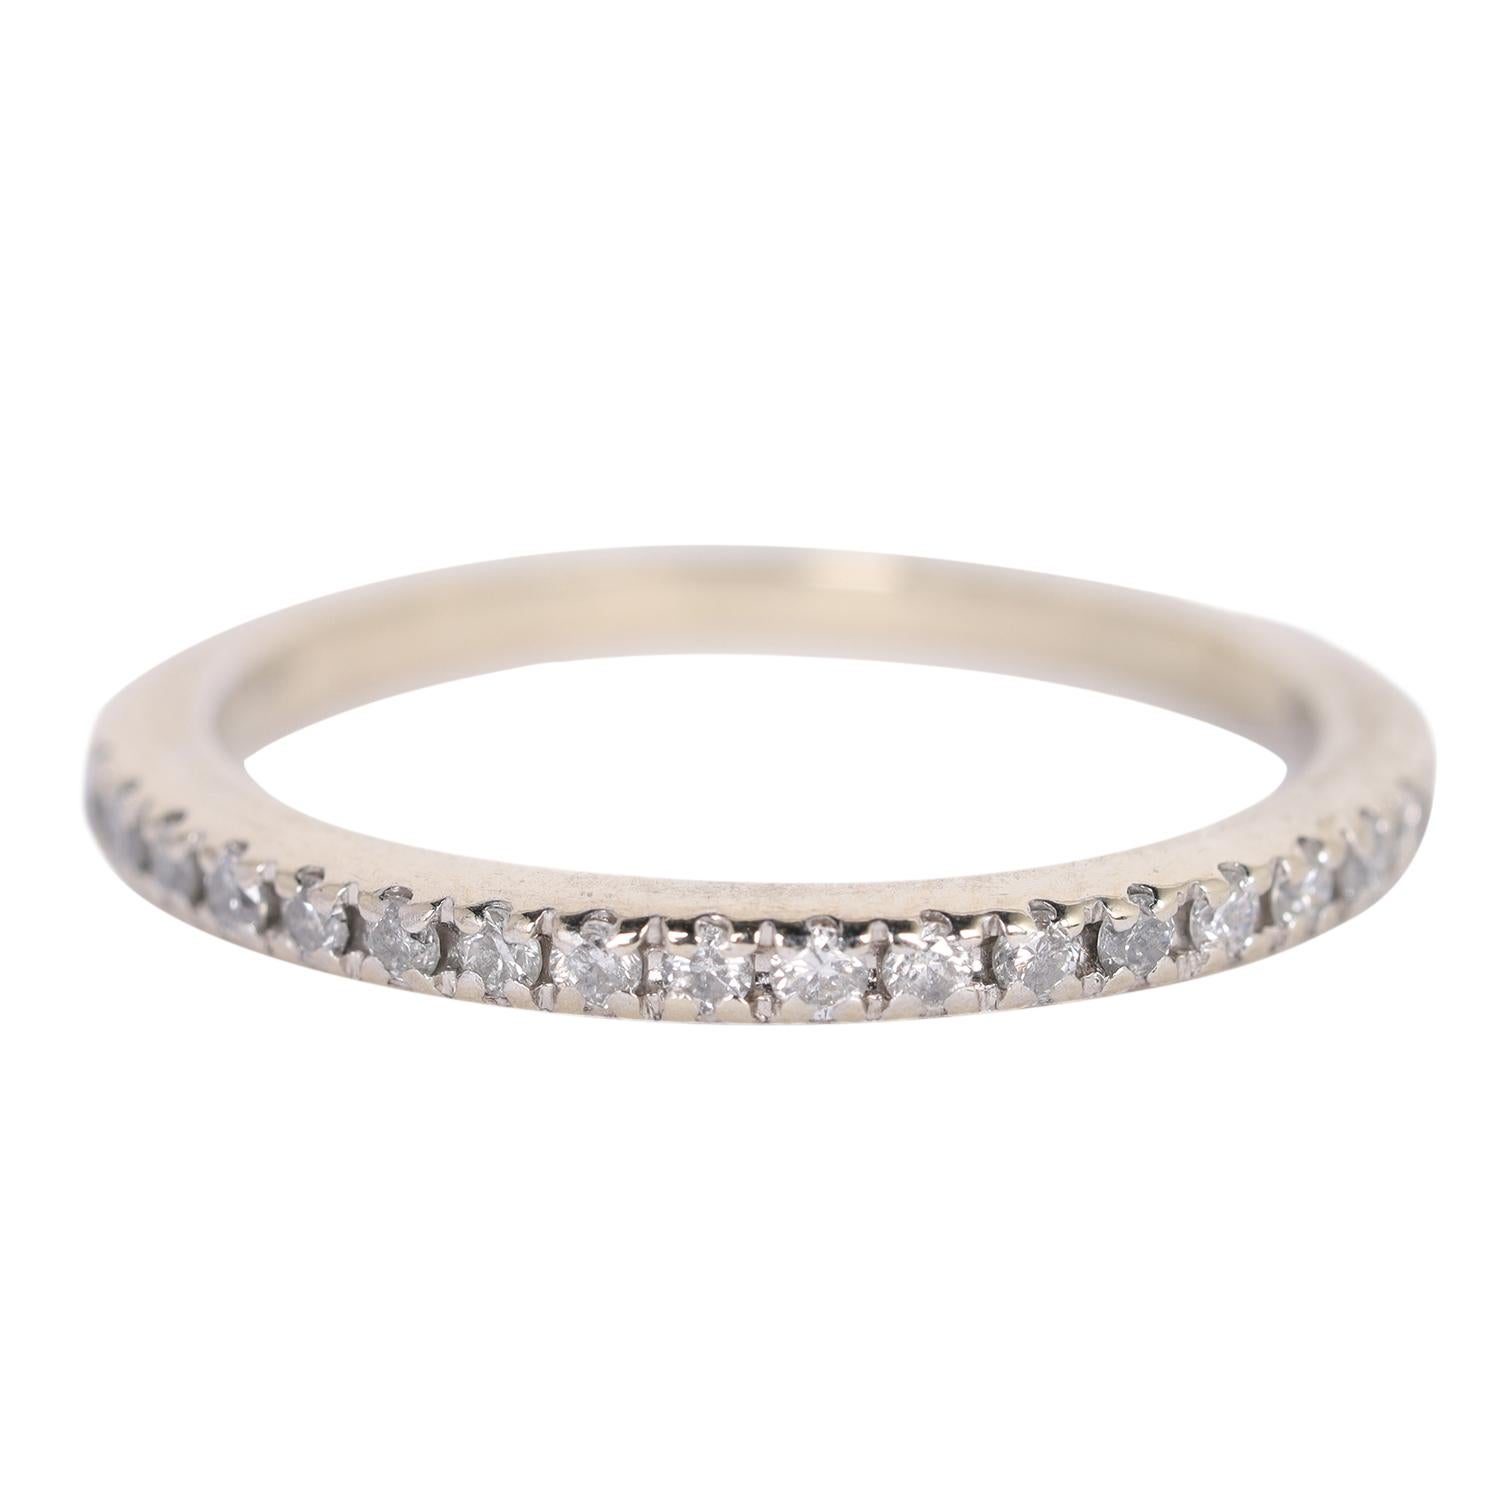 Curated by The Lady Bag Ladies

The perfect stacking band! This 14k white gold band has 17 round diamonds that are individually set in a beautiful prong band. The diamonds sparkle from every view in the dainty dazzler!

Each diamond measures